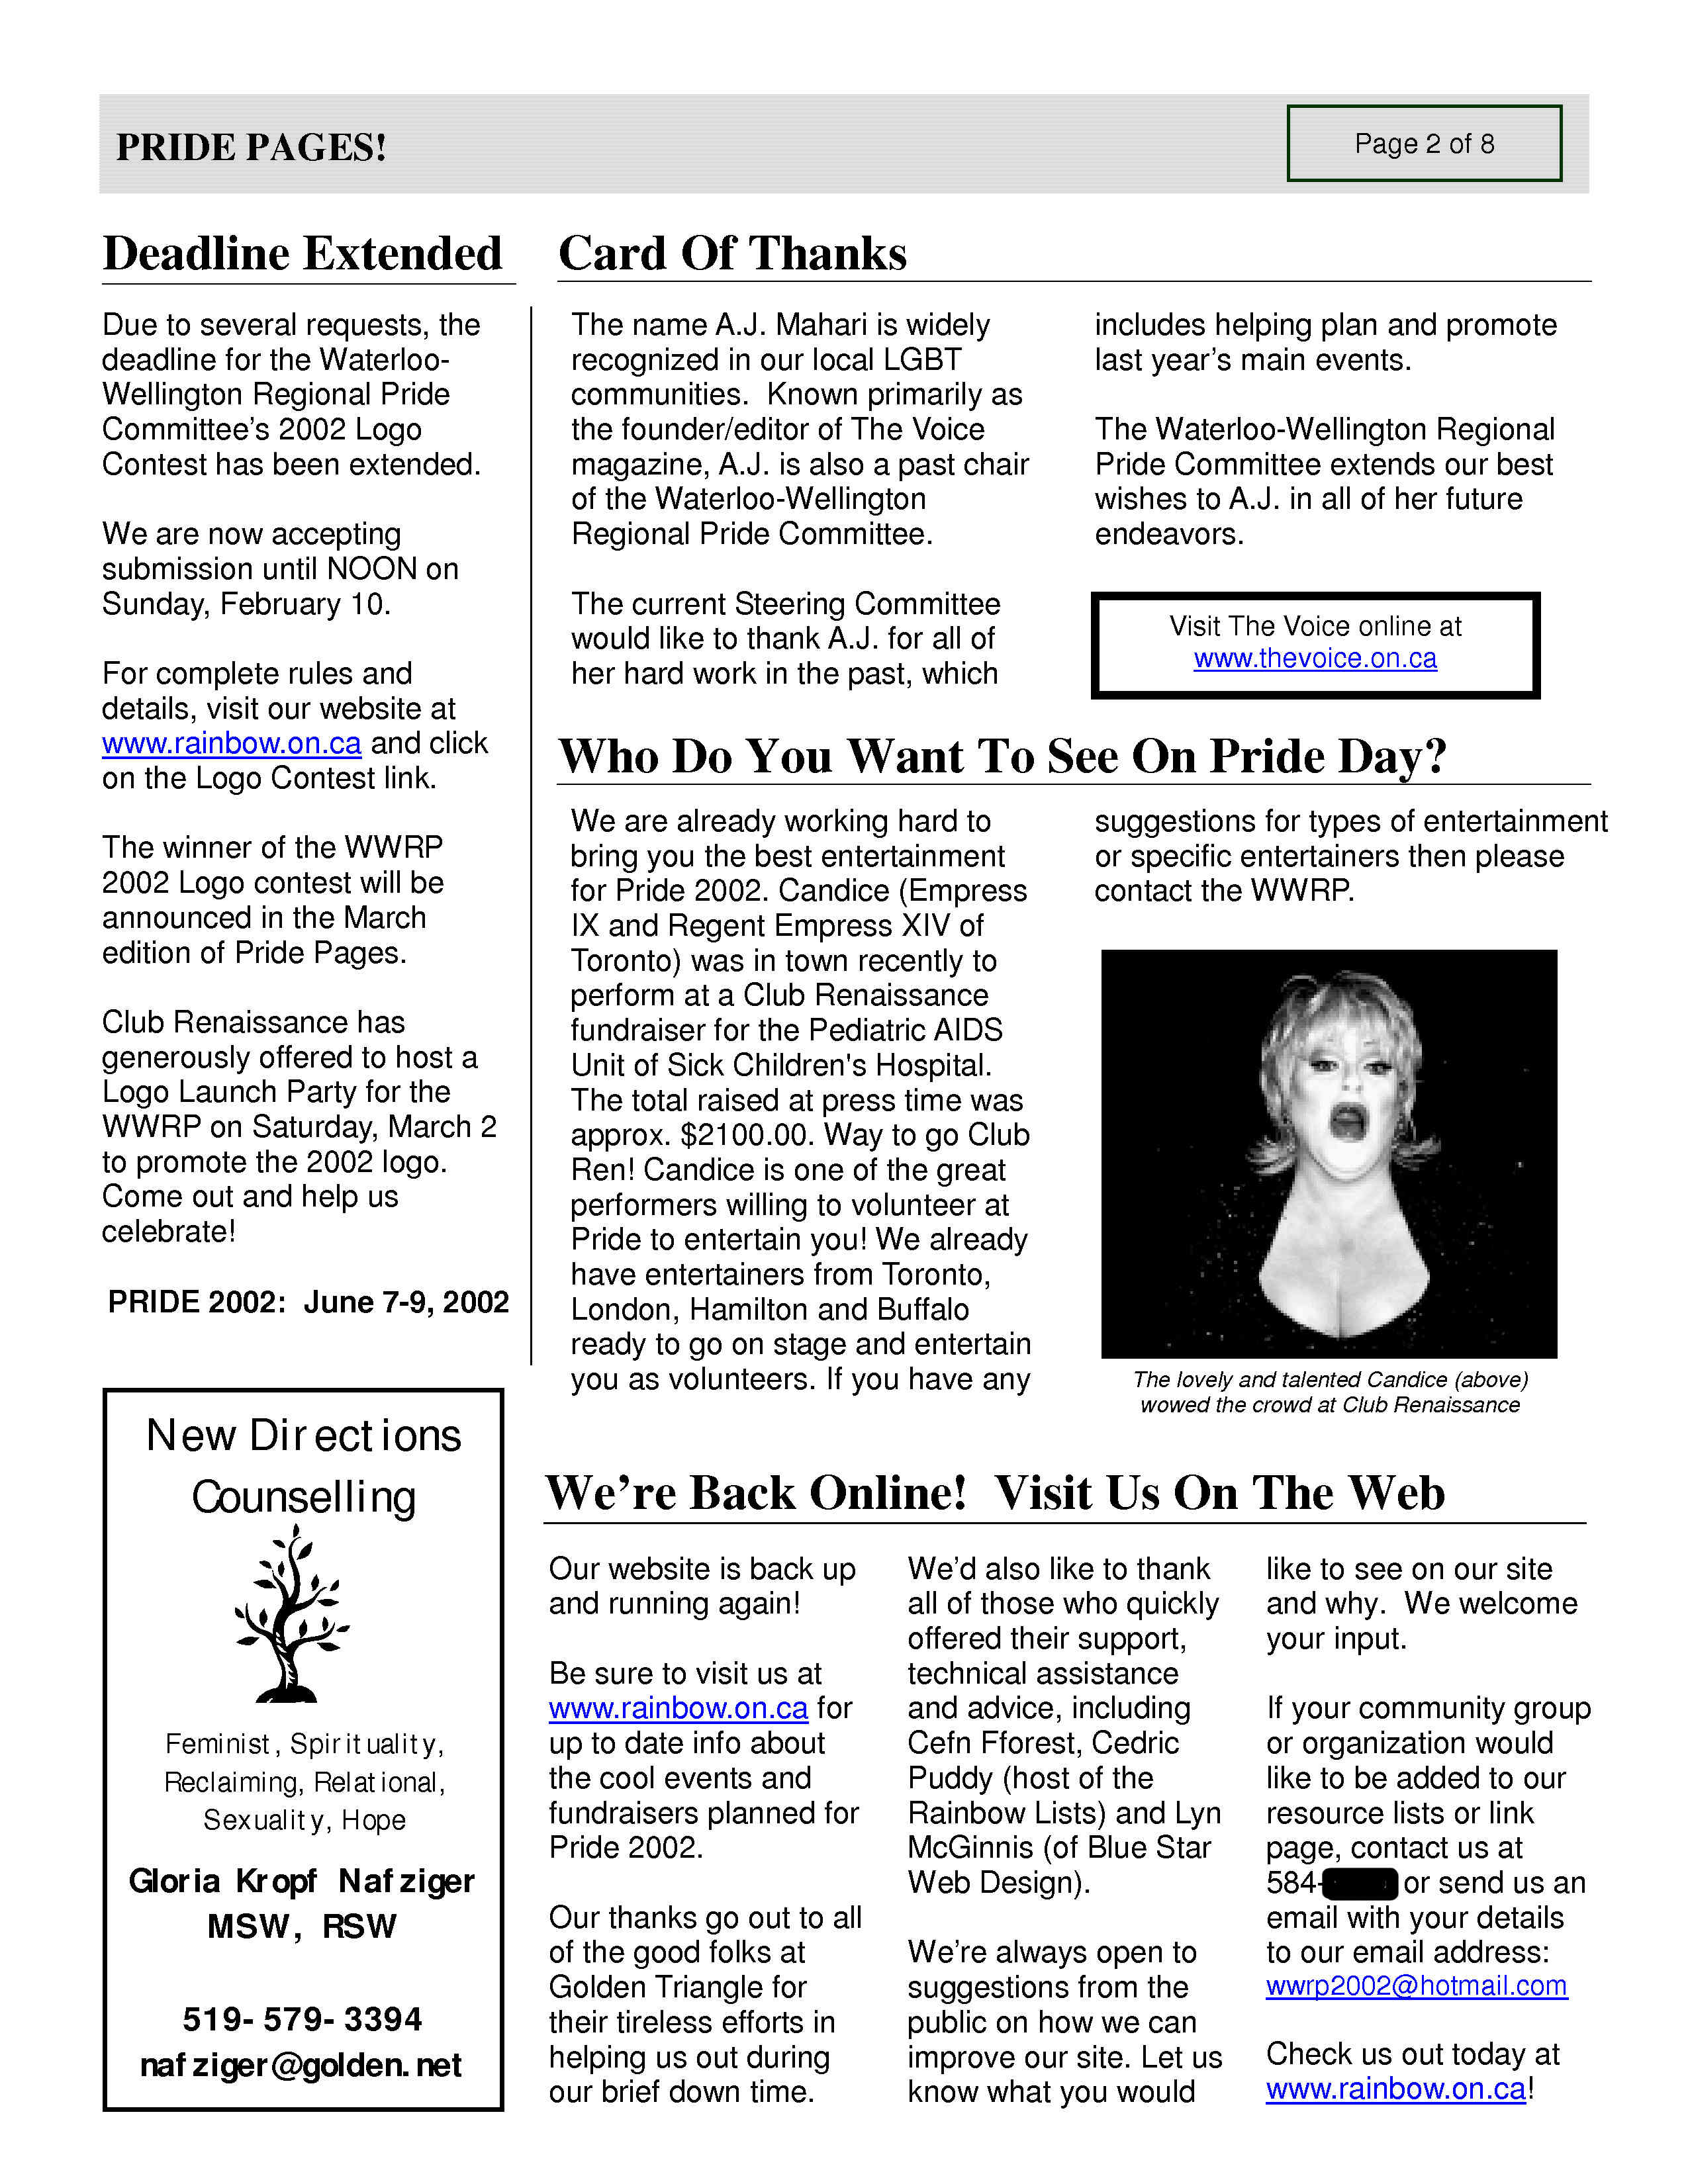 Pride Pages 2002-02 p2